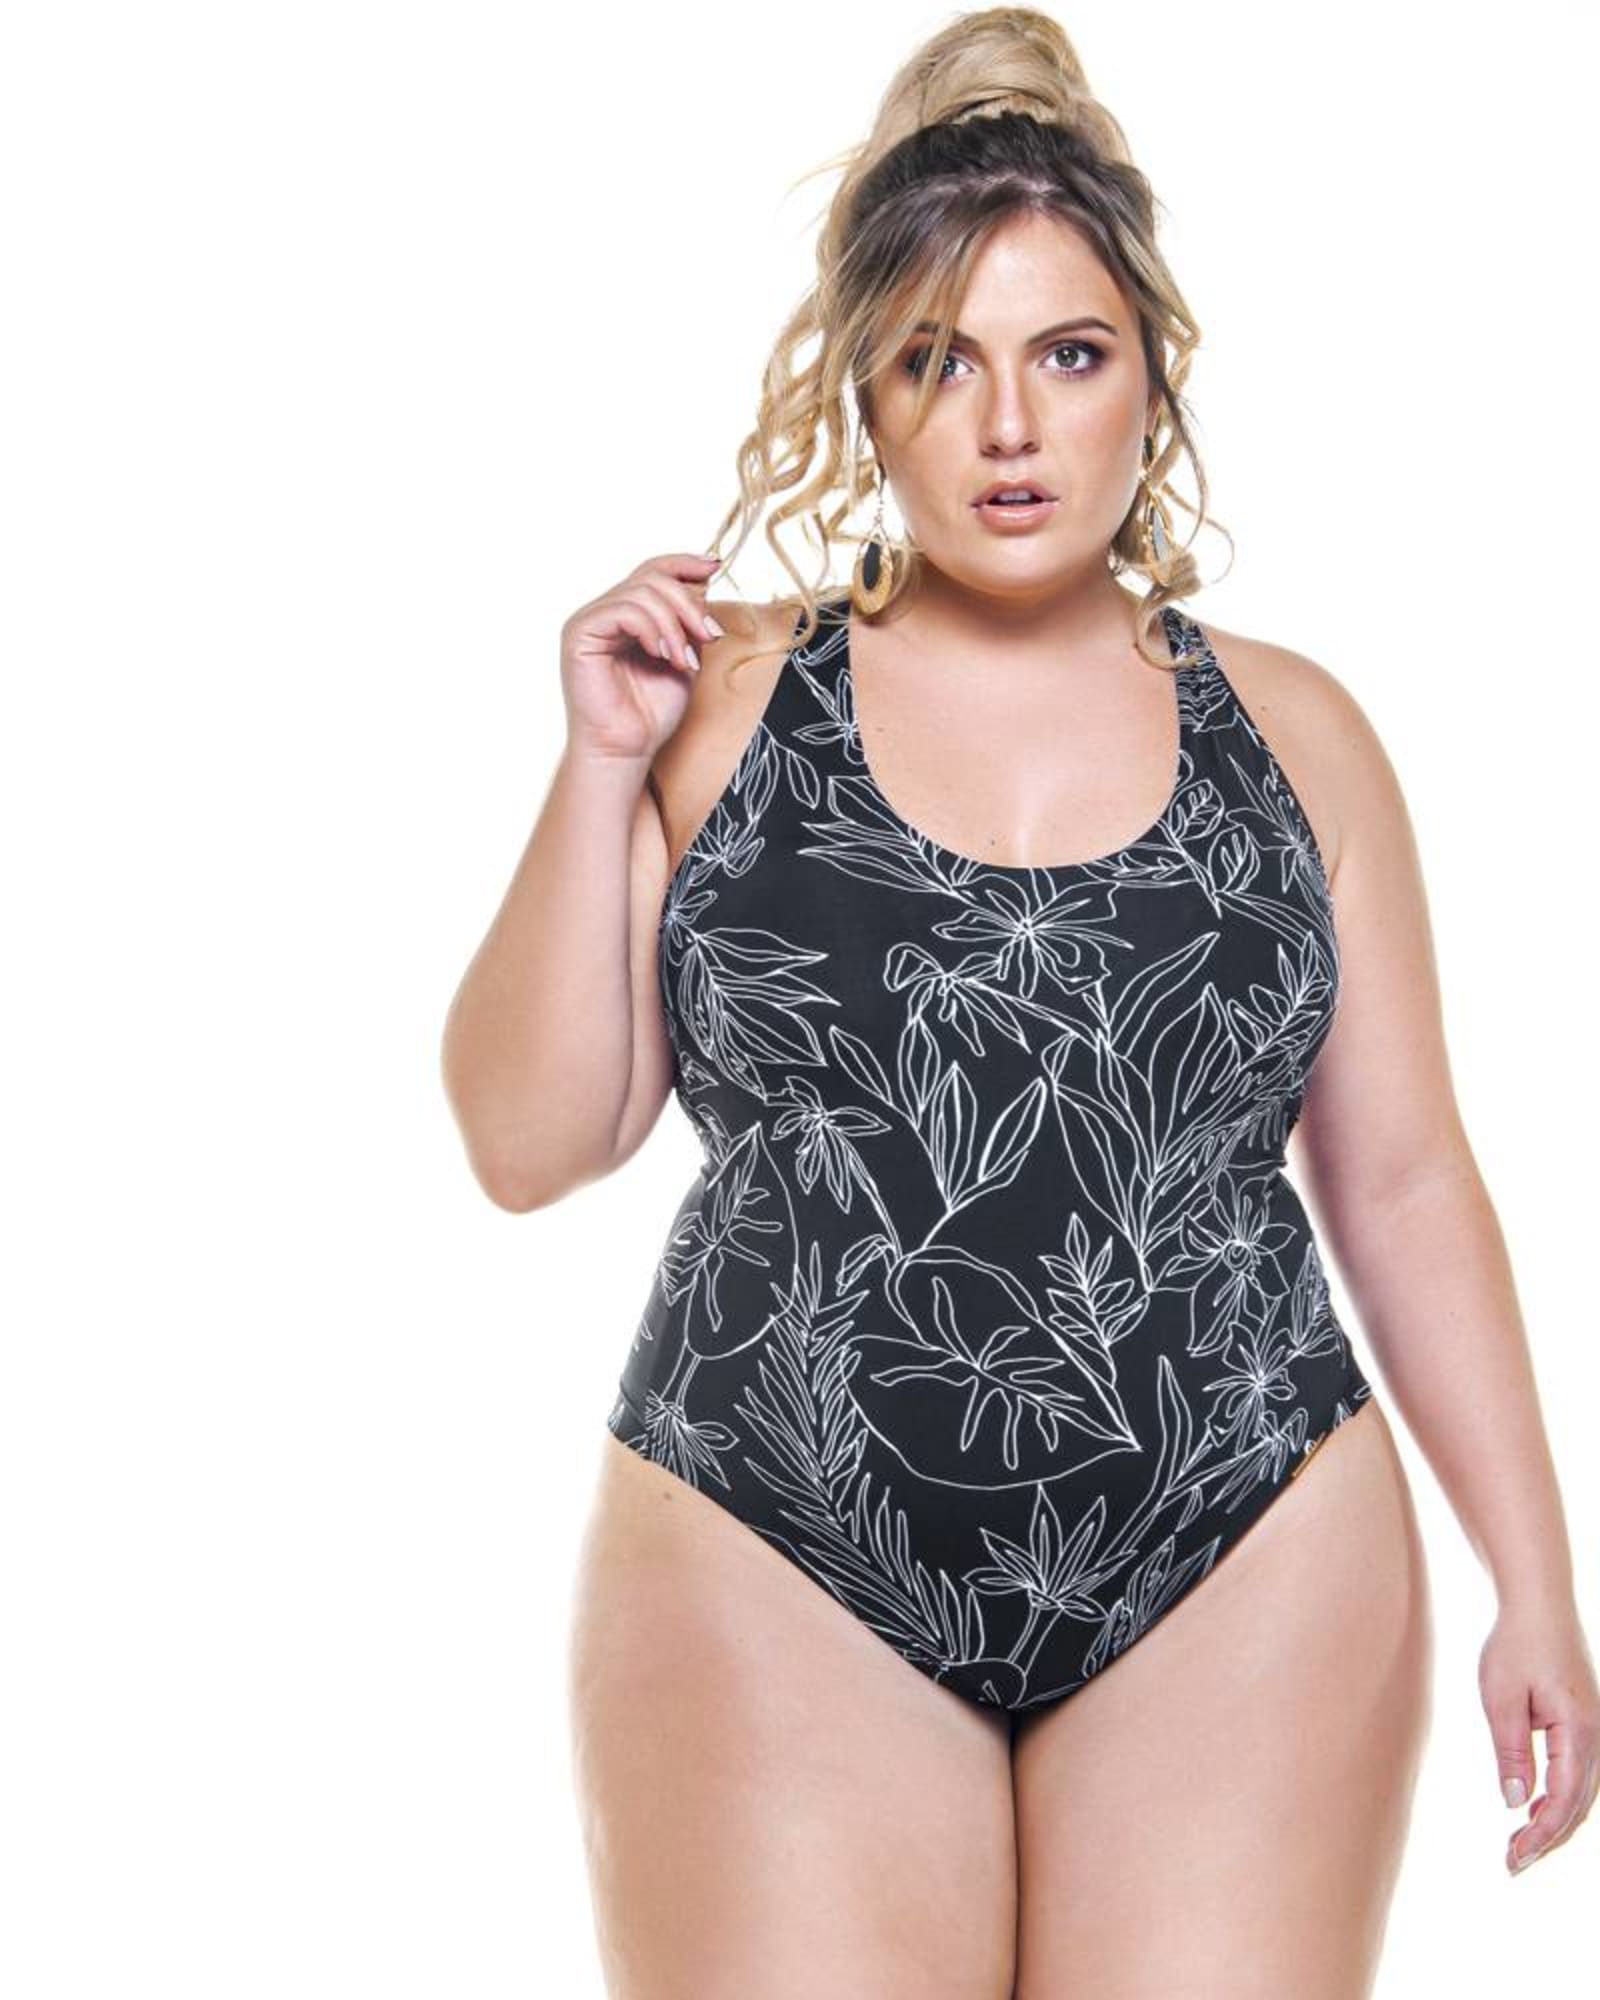 Cupped Bodysuit In Black And White Floral Print | black and white floral